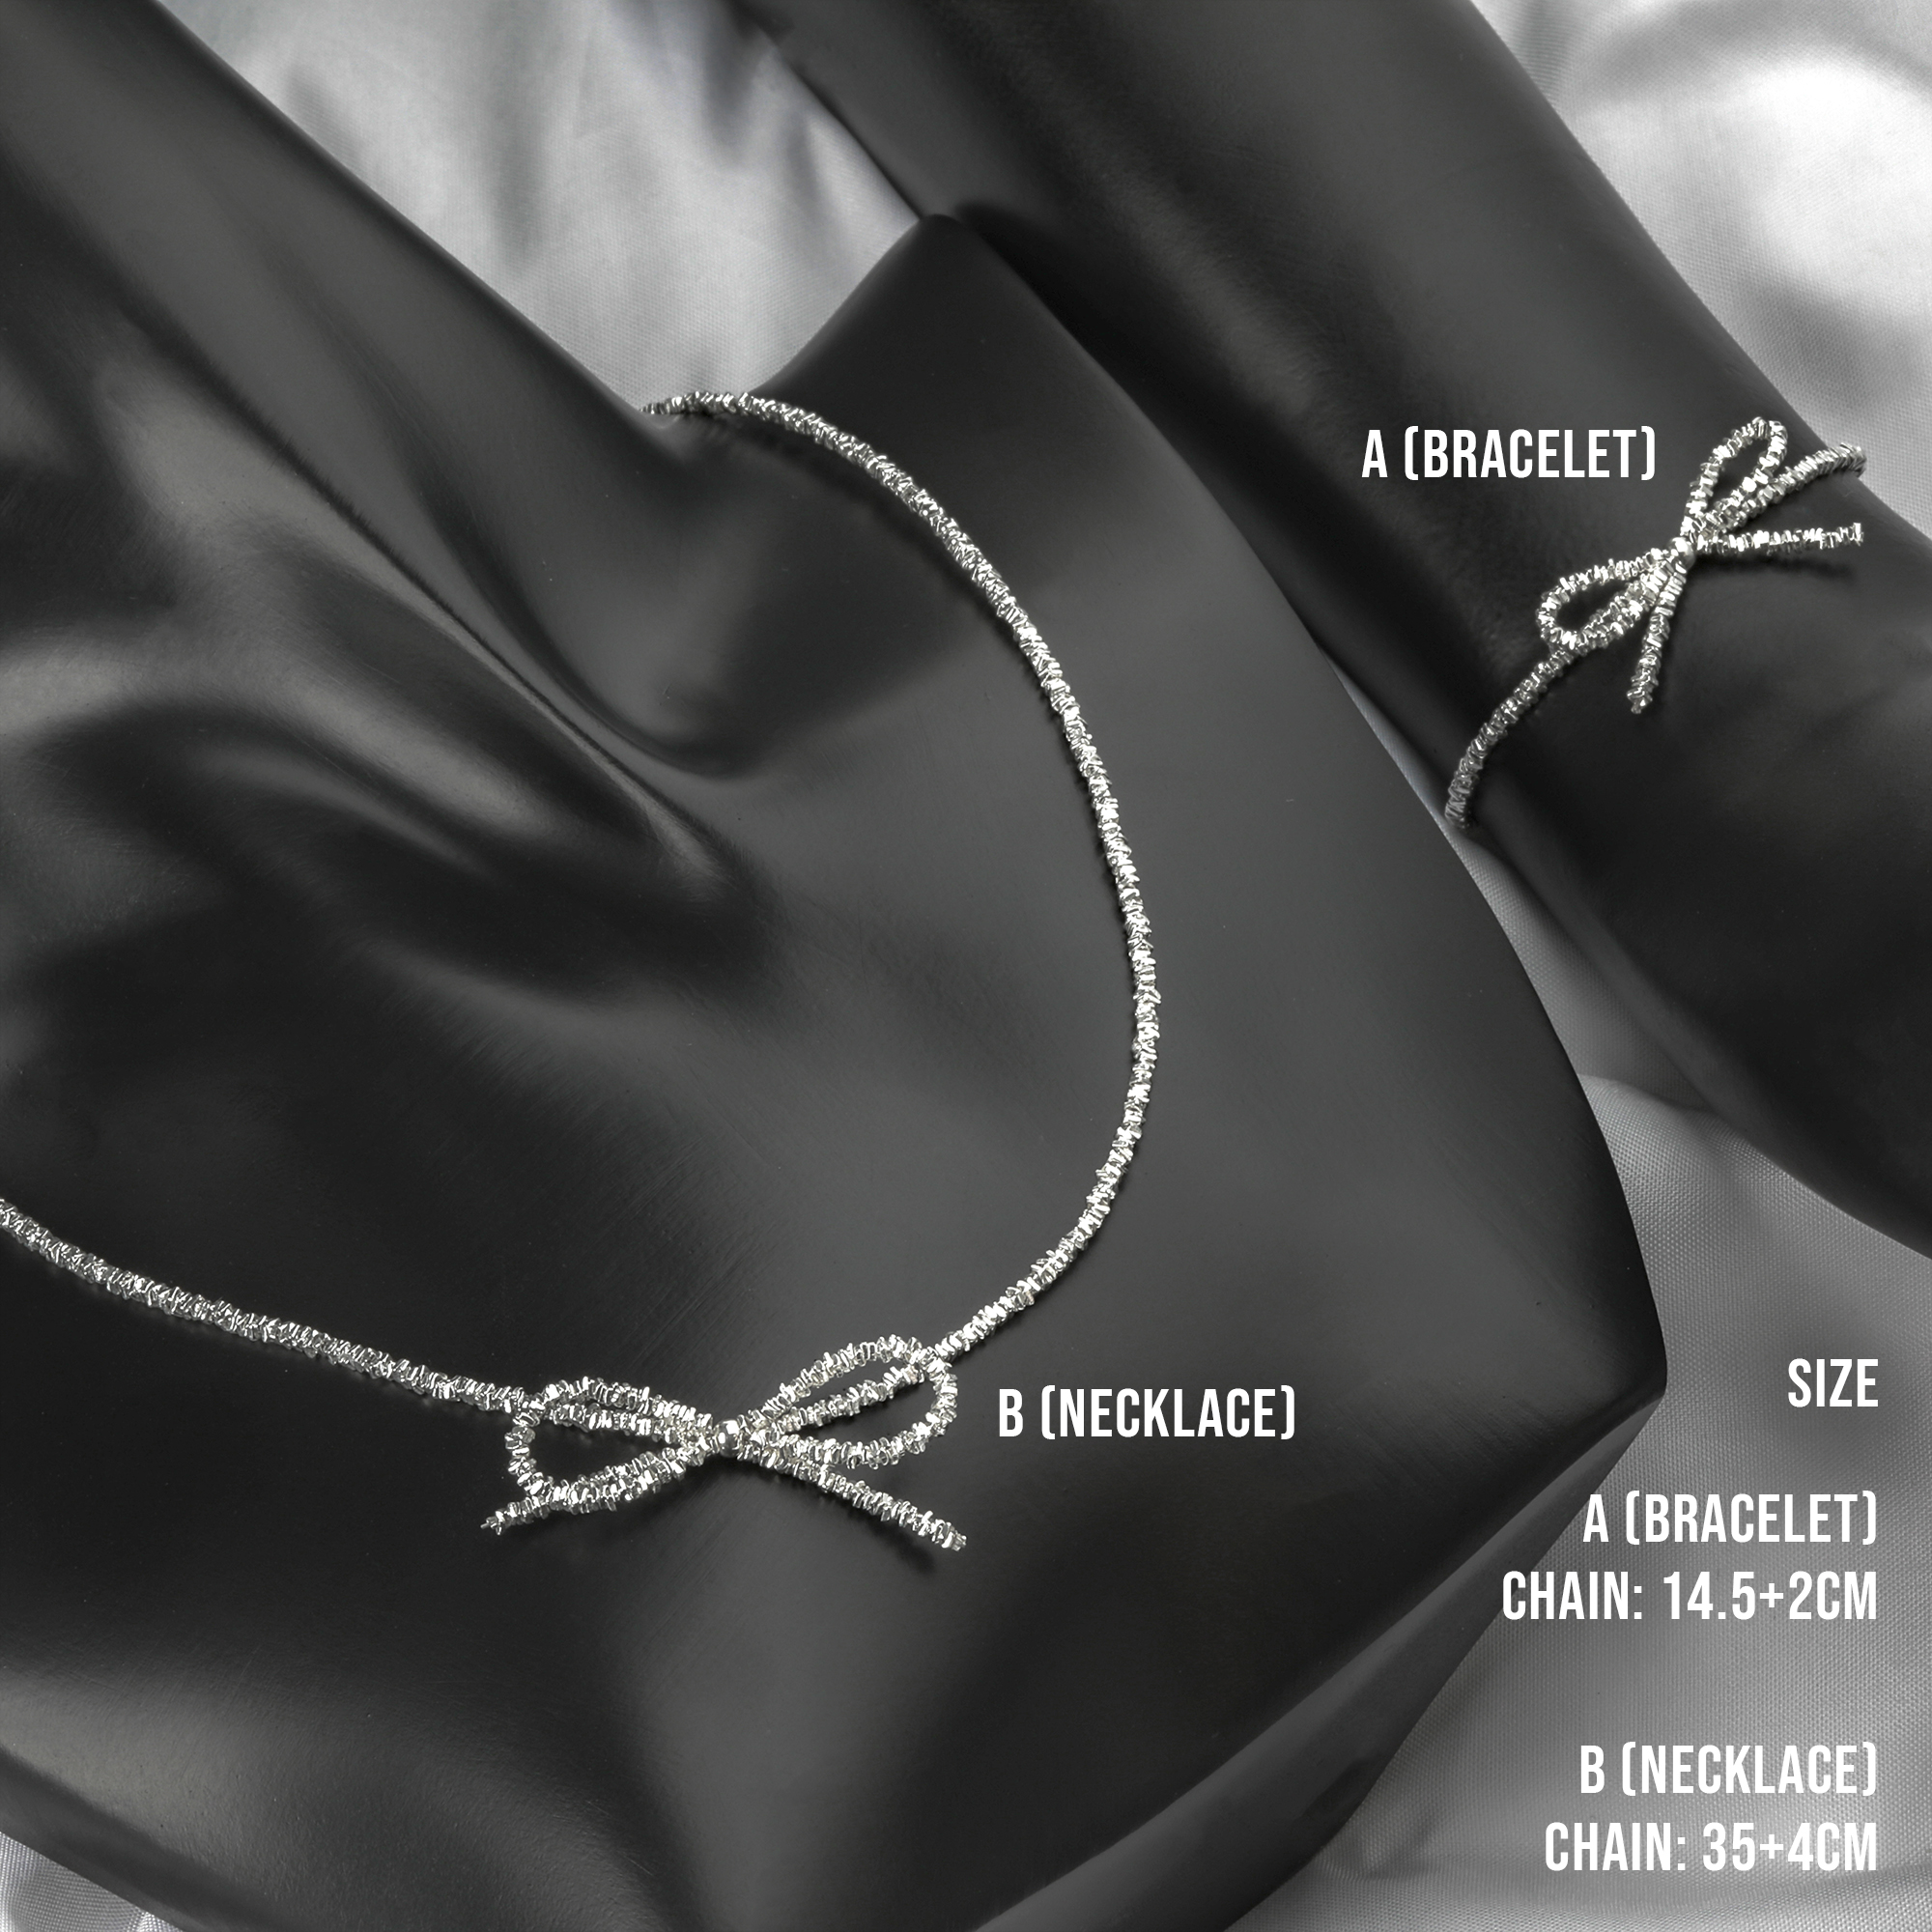 [SB4404], [SN4416] Silver 925 Spread Texture Ribbon Bracelet and Necklace SET